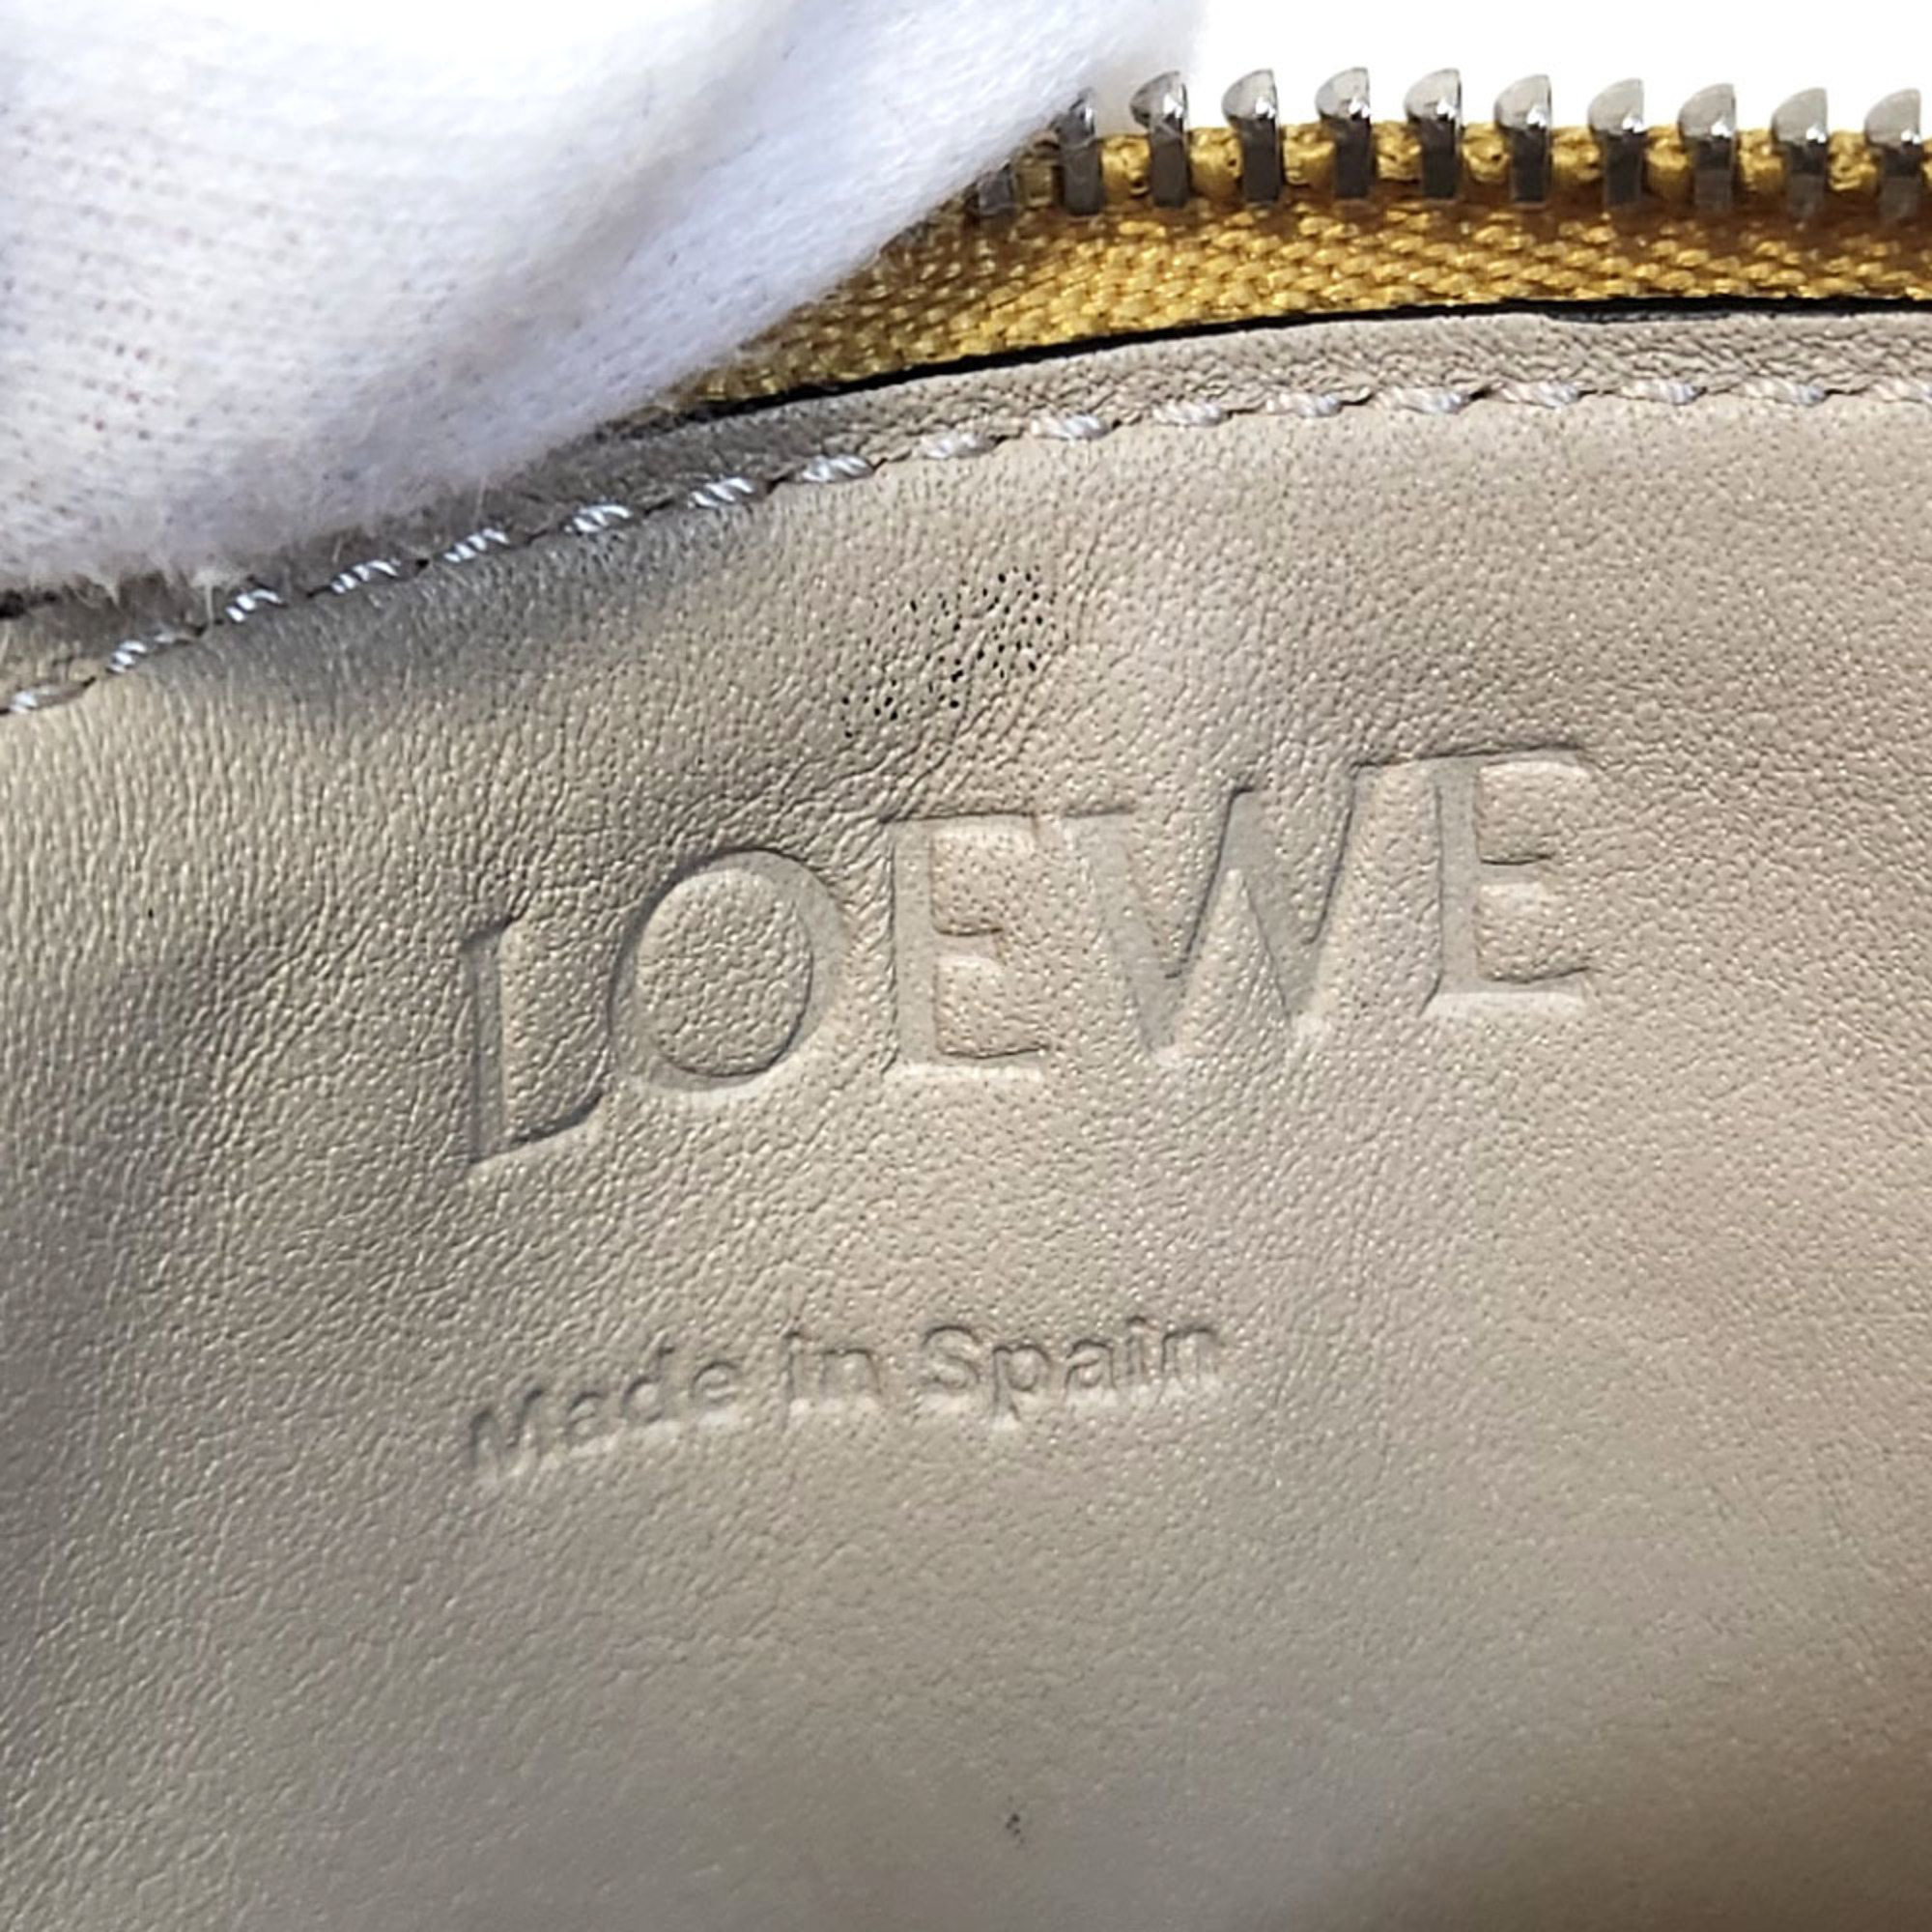 LOEWE Fragment Case - Mustard Leather Wallet/Coin Case, Coin Purse, Business Card Women's, Men's